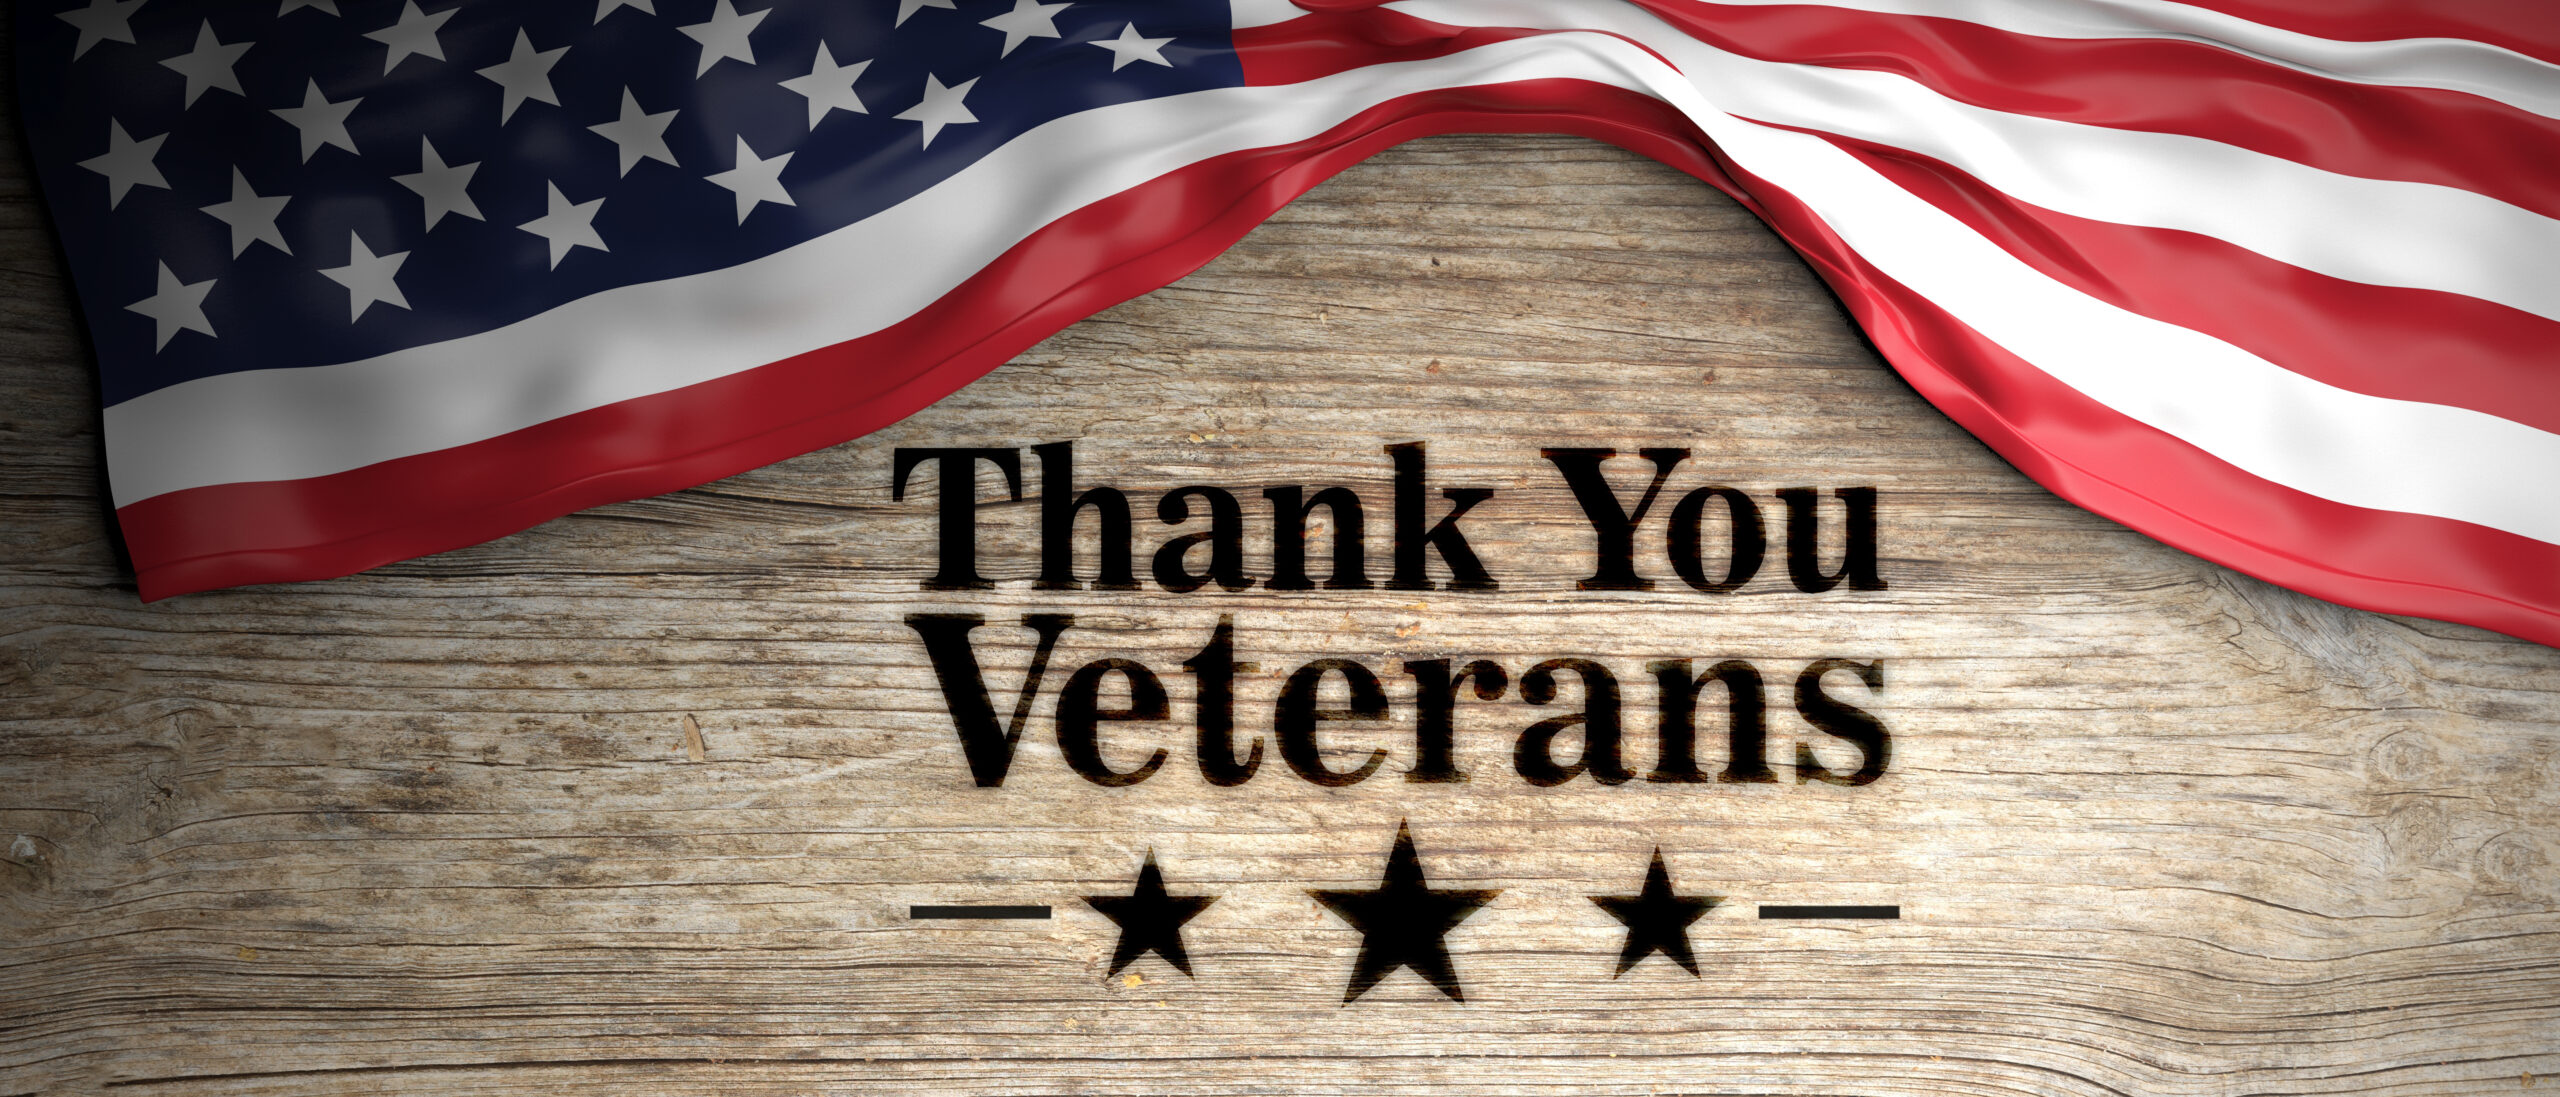 United States flag with thank you veterans message. Wooden background. 3d illustration